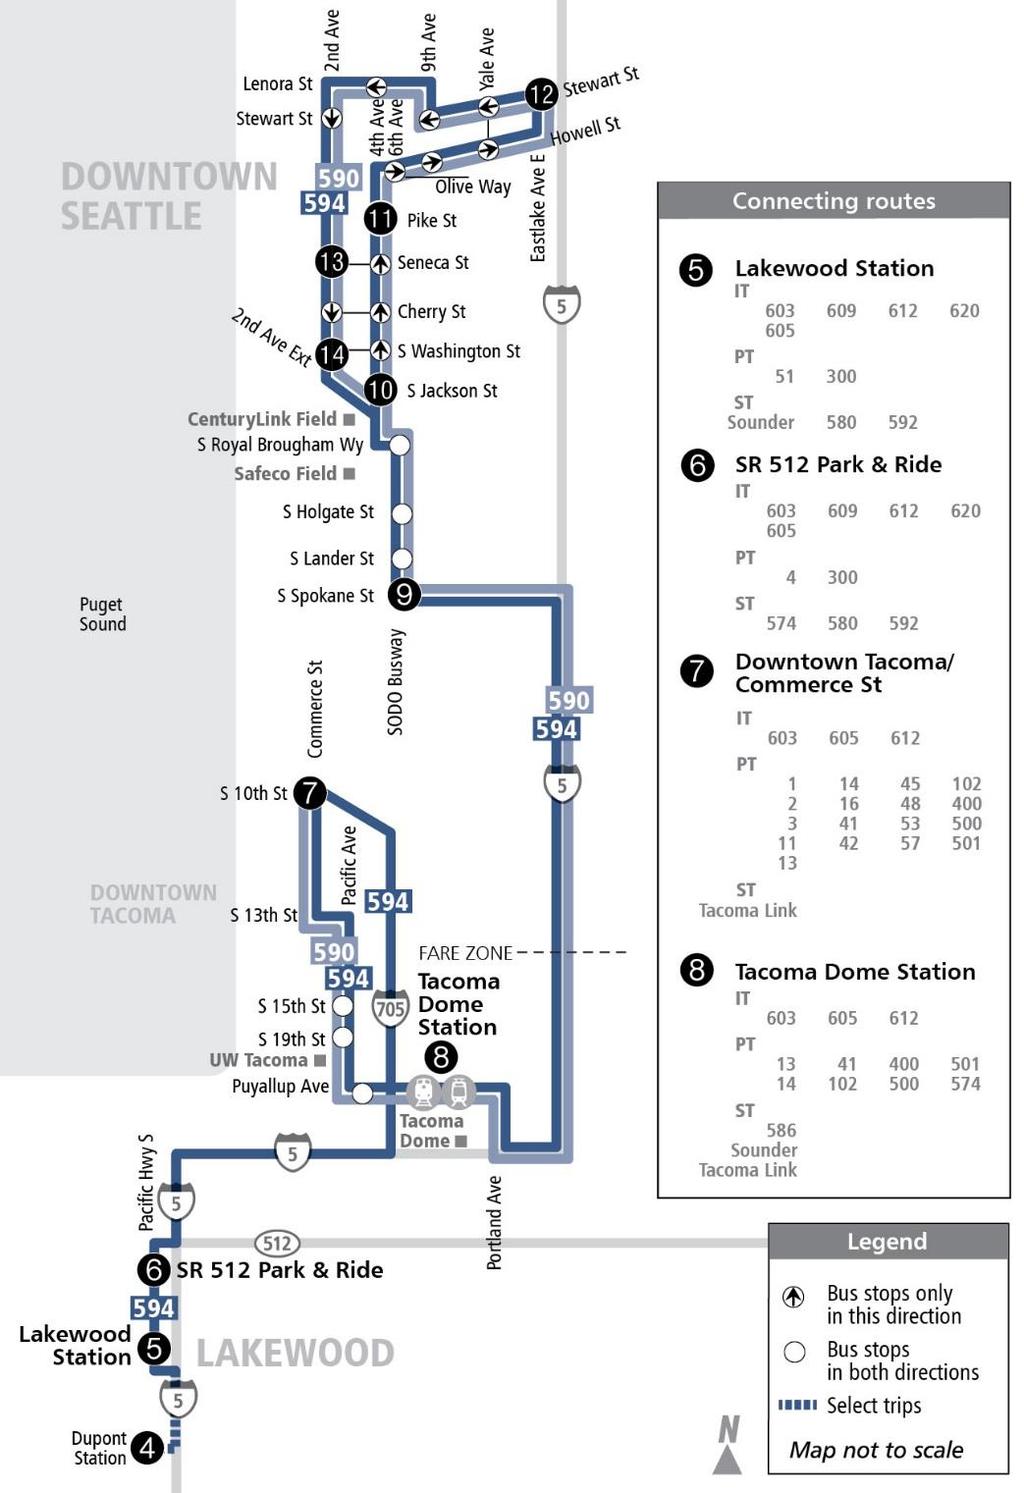 Chapter Two: Service Analysis Route 590: Tacoma Seattle Route 590 connects Downtown Tacoma and the Tacoma Dome to Downtown Seattle via I-5 and the SODO busway.